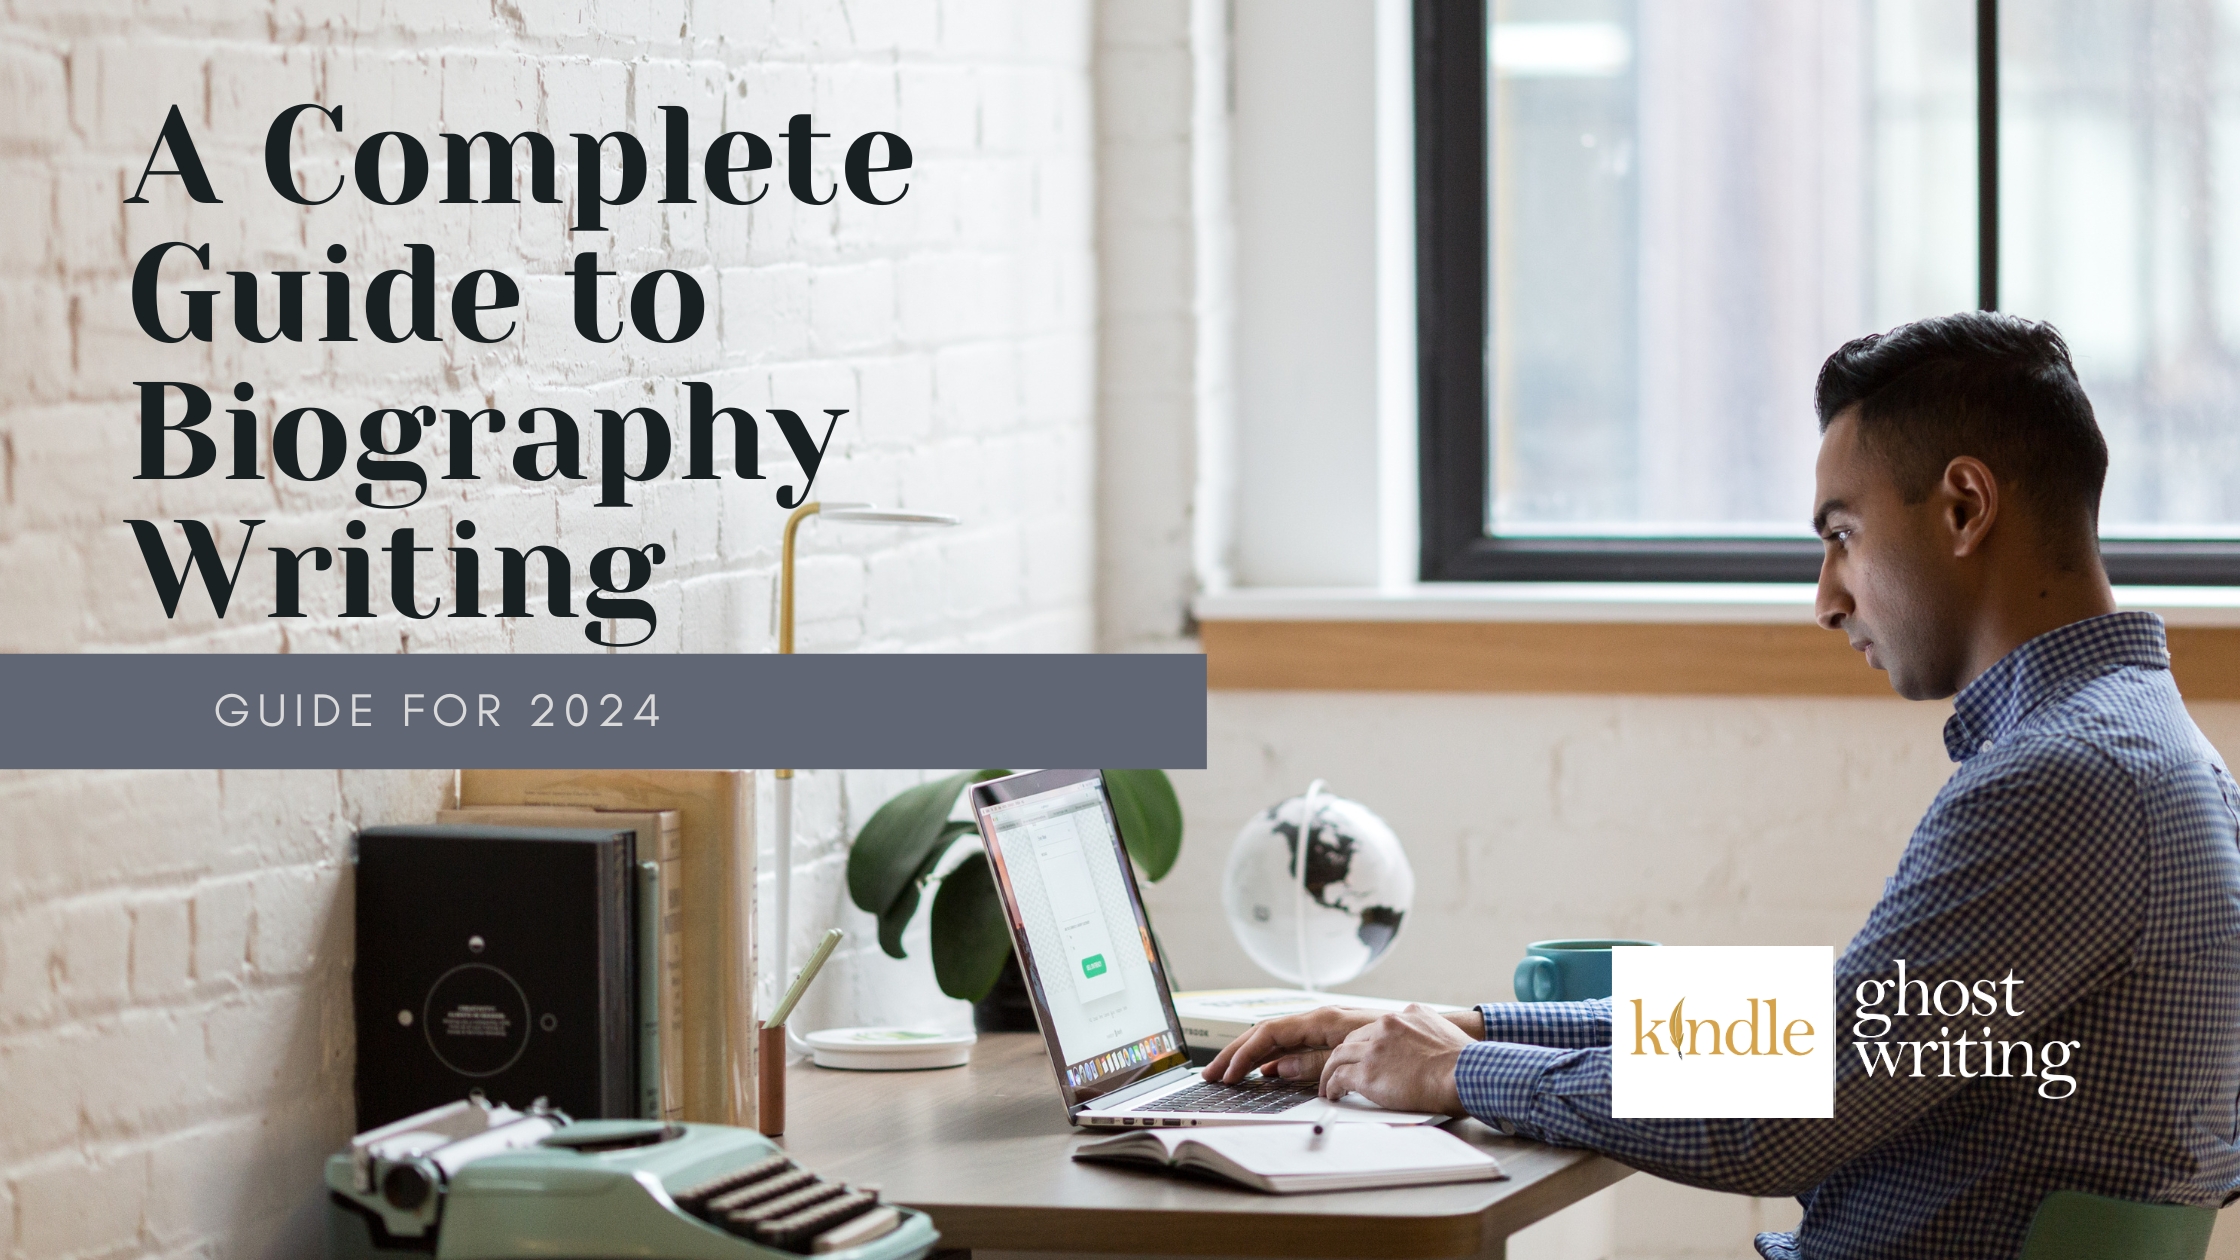 A Complete Guide to Biography Writing